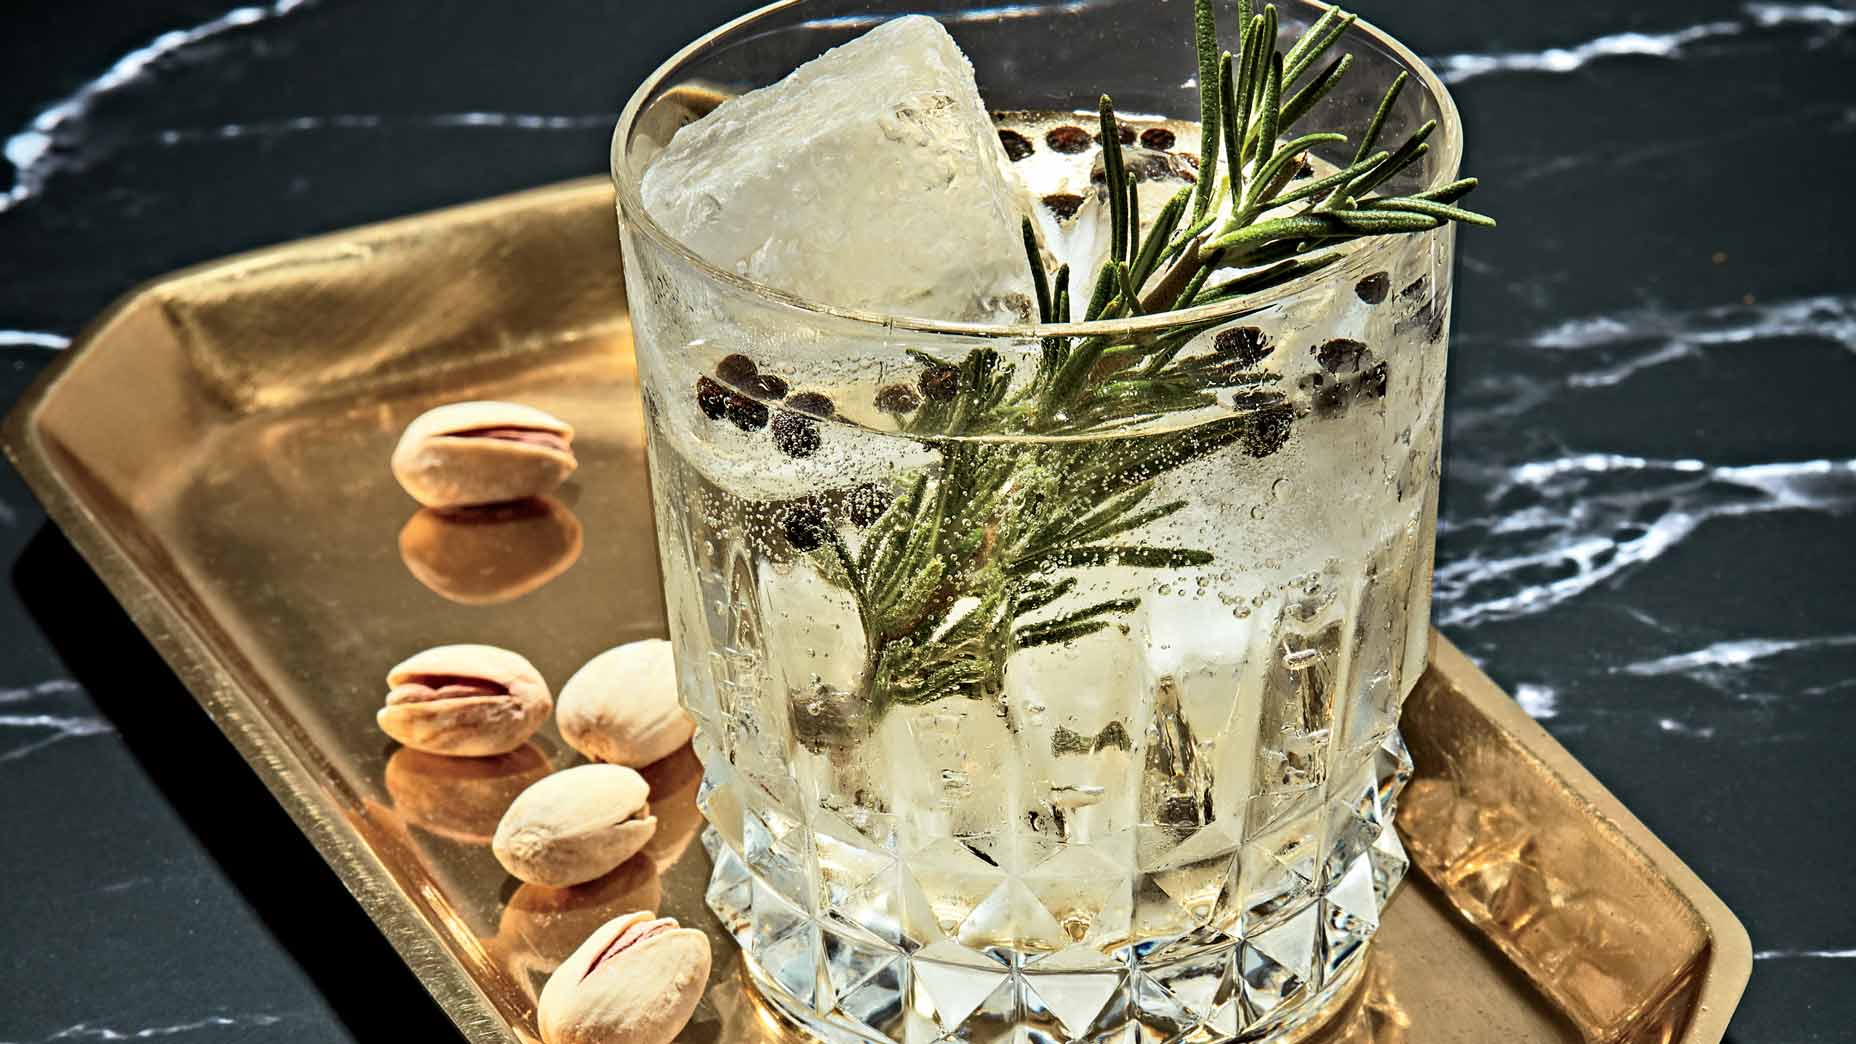 IV. The Perfect Gin and Tonic Recipe